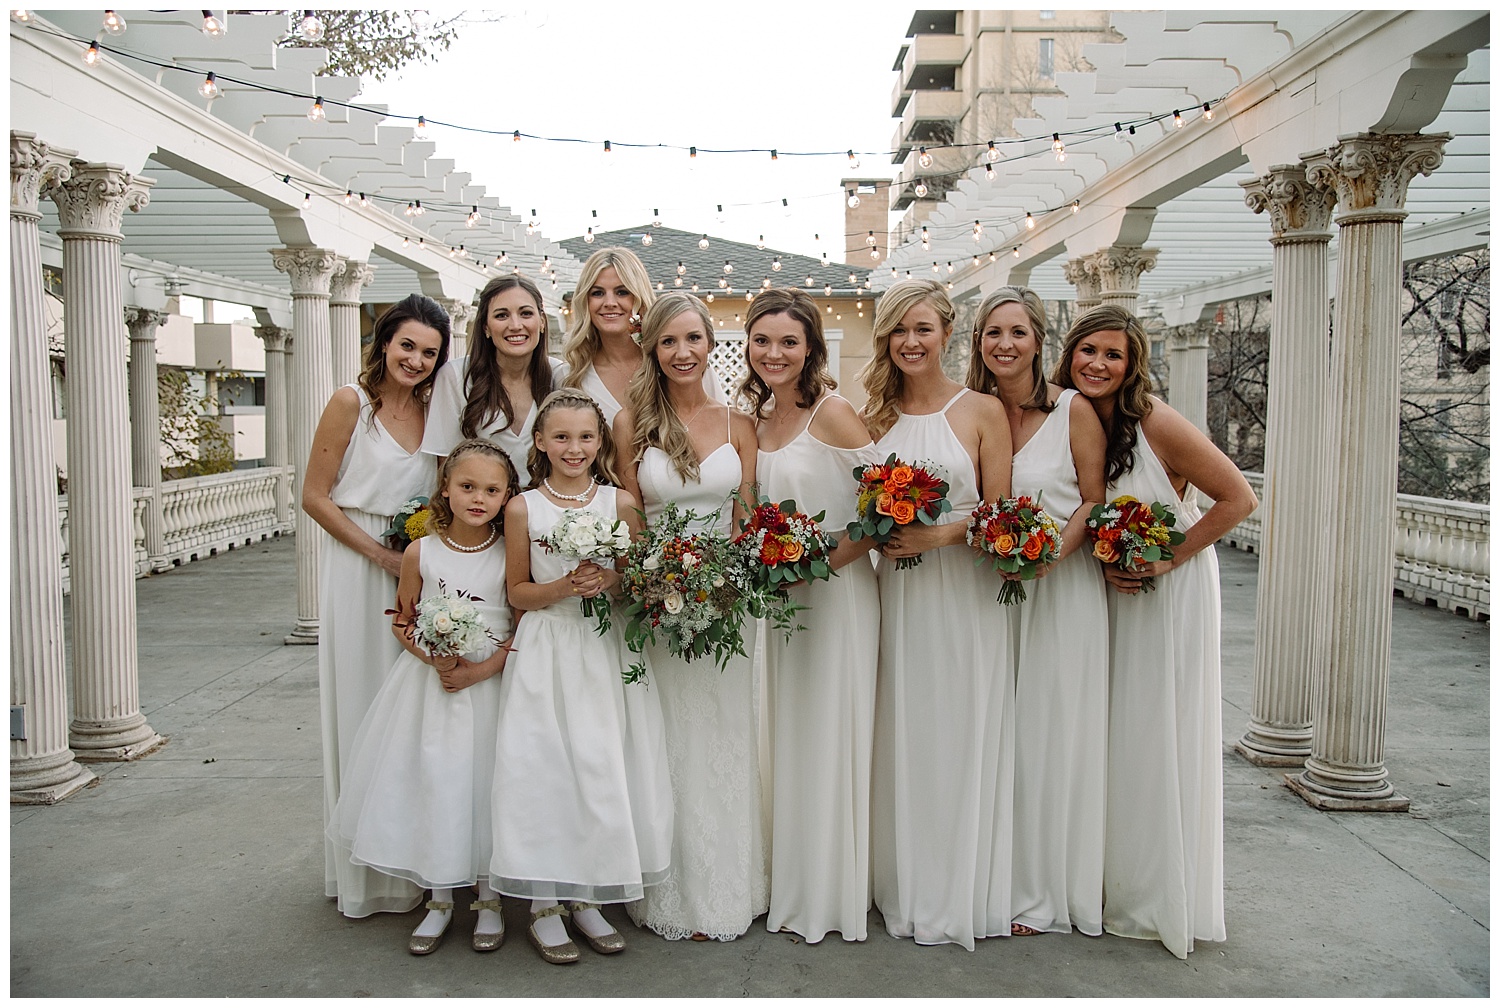 Bridesmaids in White Gowns | Lindsey and Jeff's Intimate Wedding at Grant Humphrey's Mansion | Denver Colorado Photographer | Farm Wedding Photographer | Apollo Fields Photojournalism